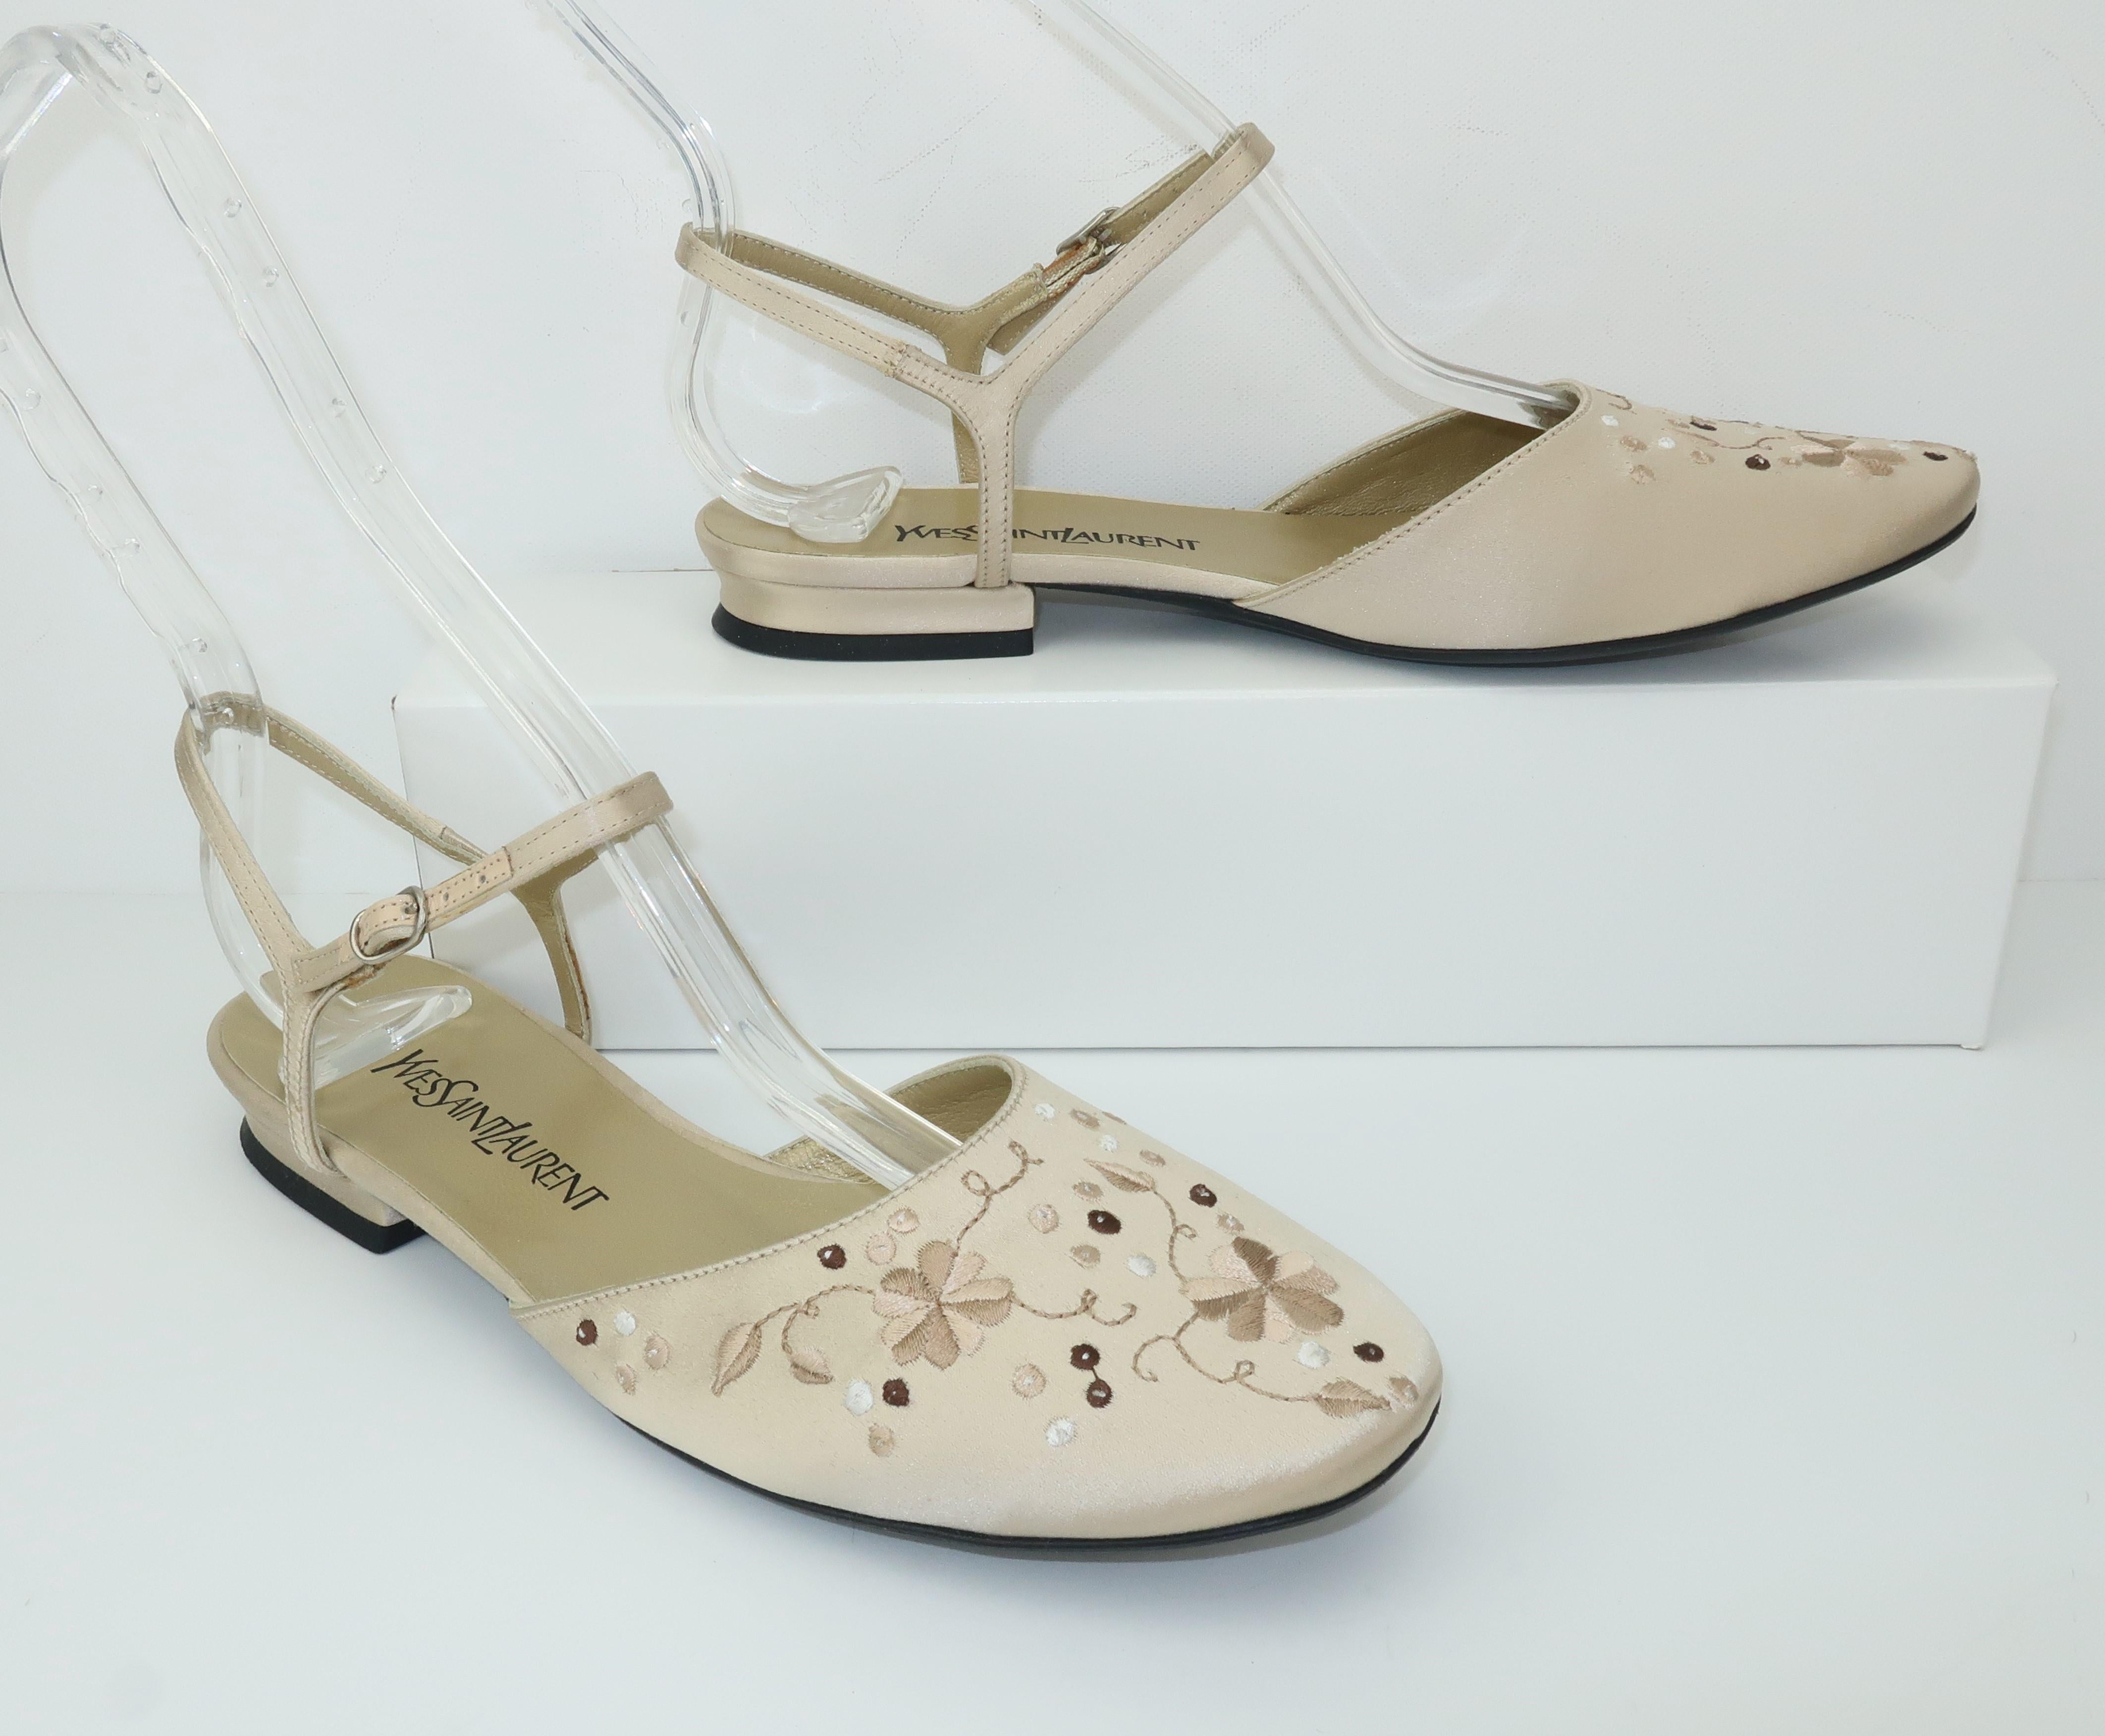 Yves Saint Laurent creates a flat ankle strap shoe in an ivory satin with beige and brown embroidered flowers accented by curling vines.  Lovely for day or evening wear.  Marked size 6 M with original box.  Excellent previously owned though never